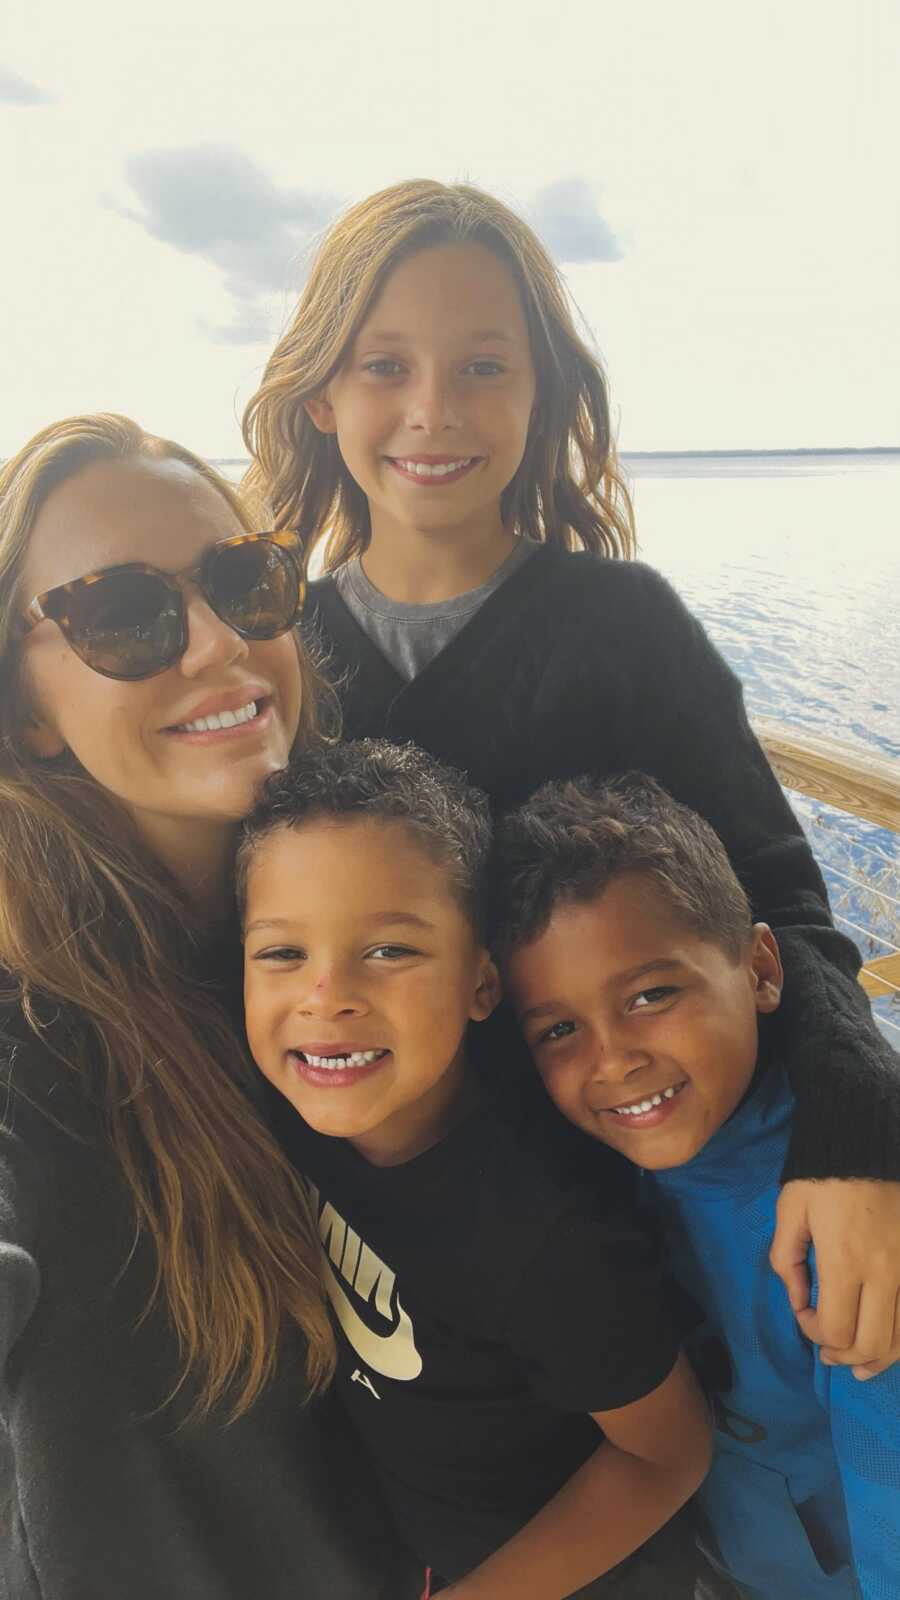 Foster mom smiling next to three kids